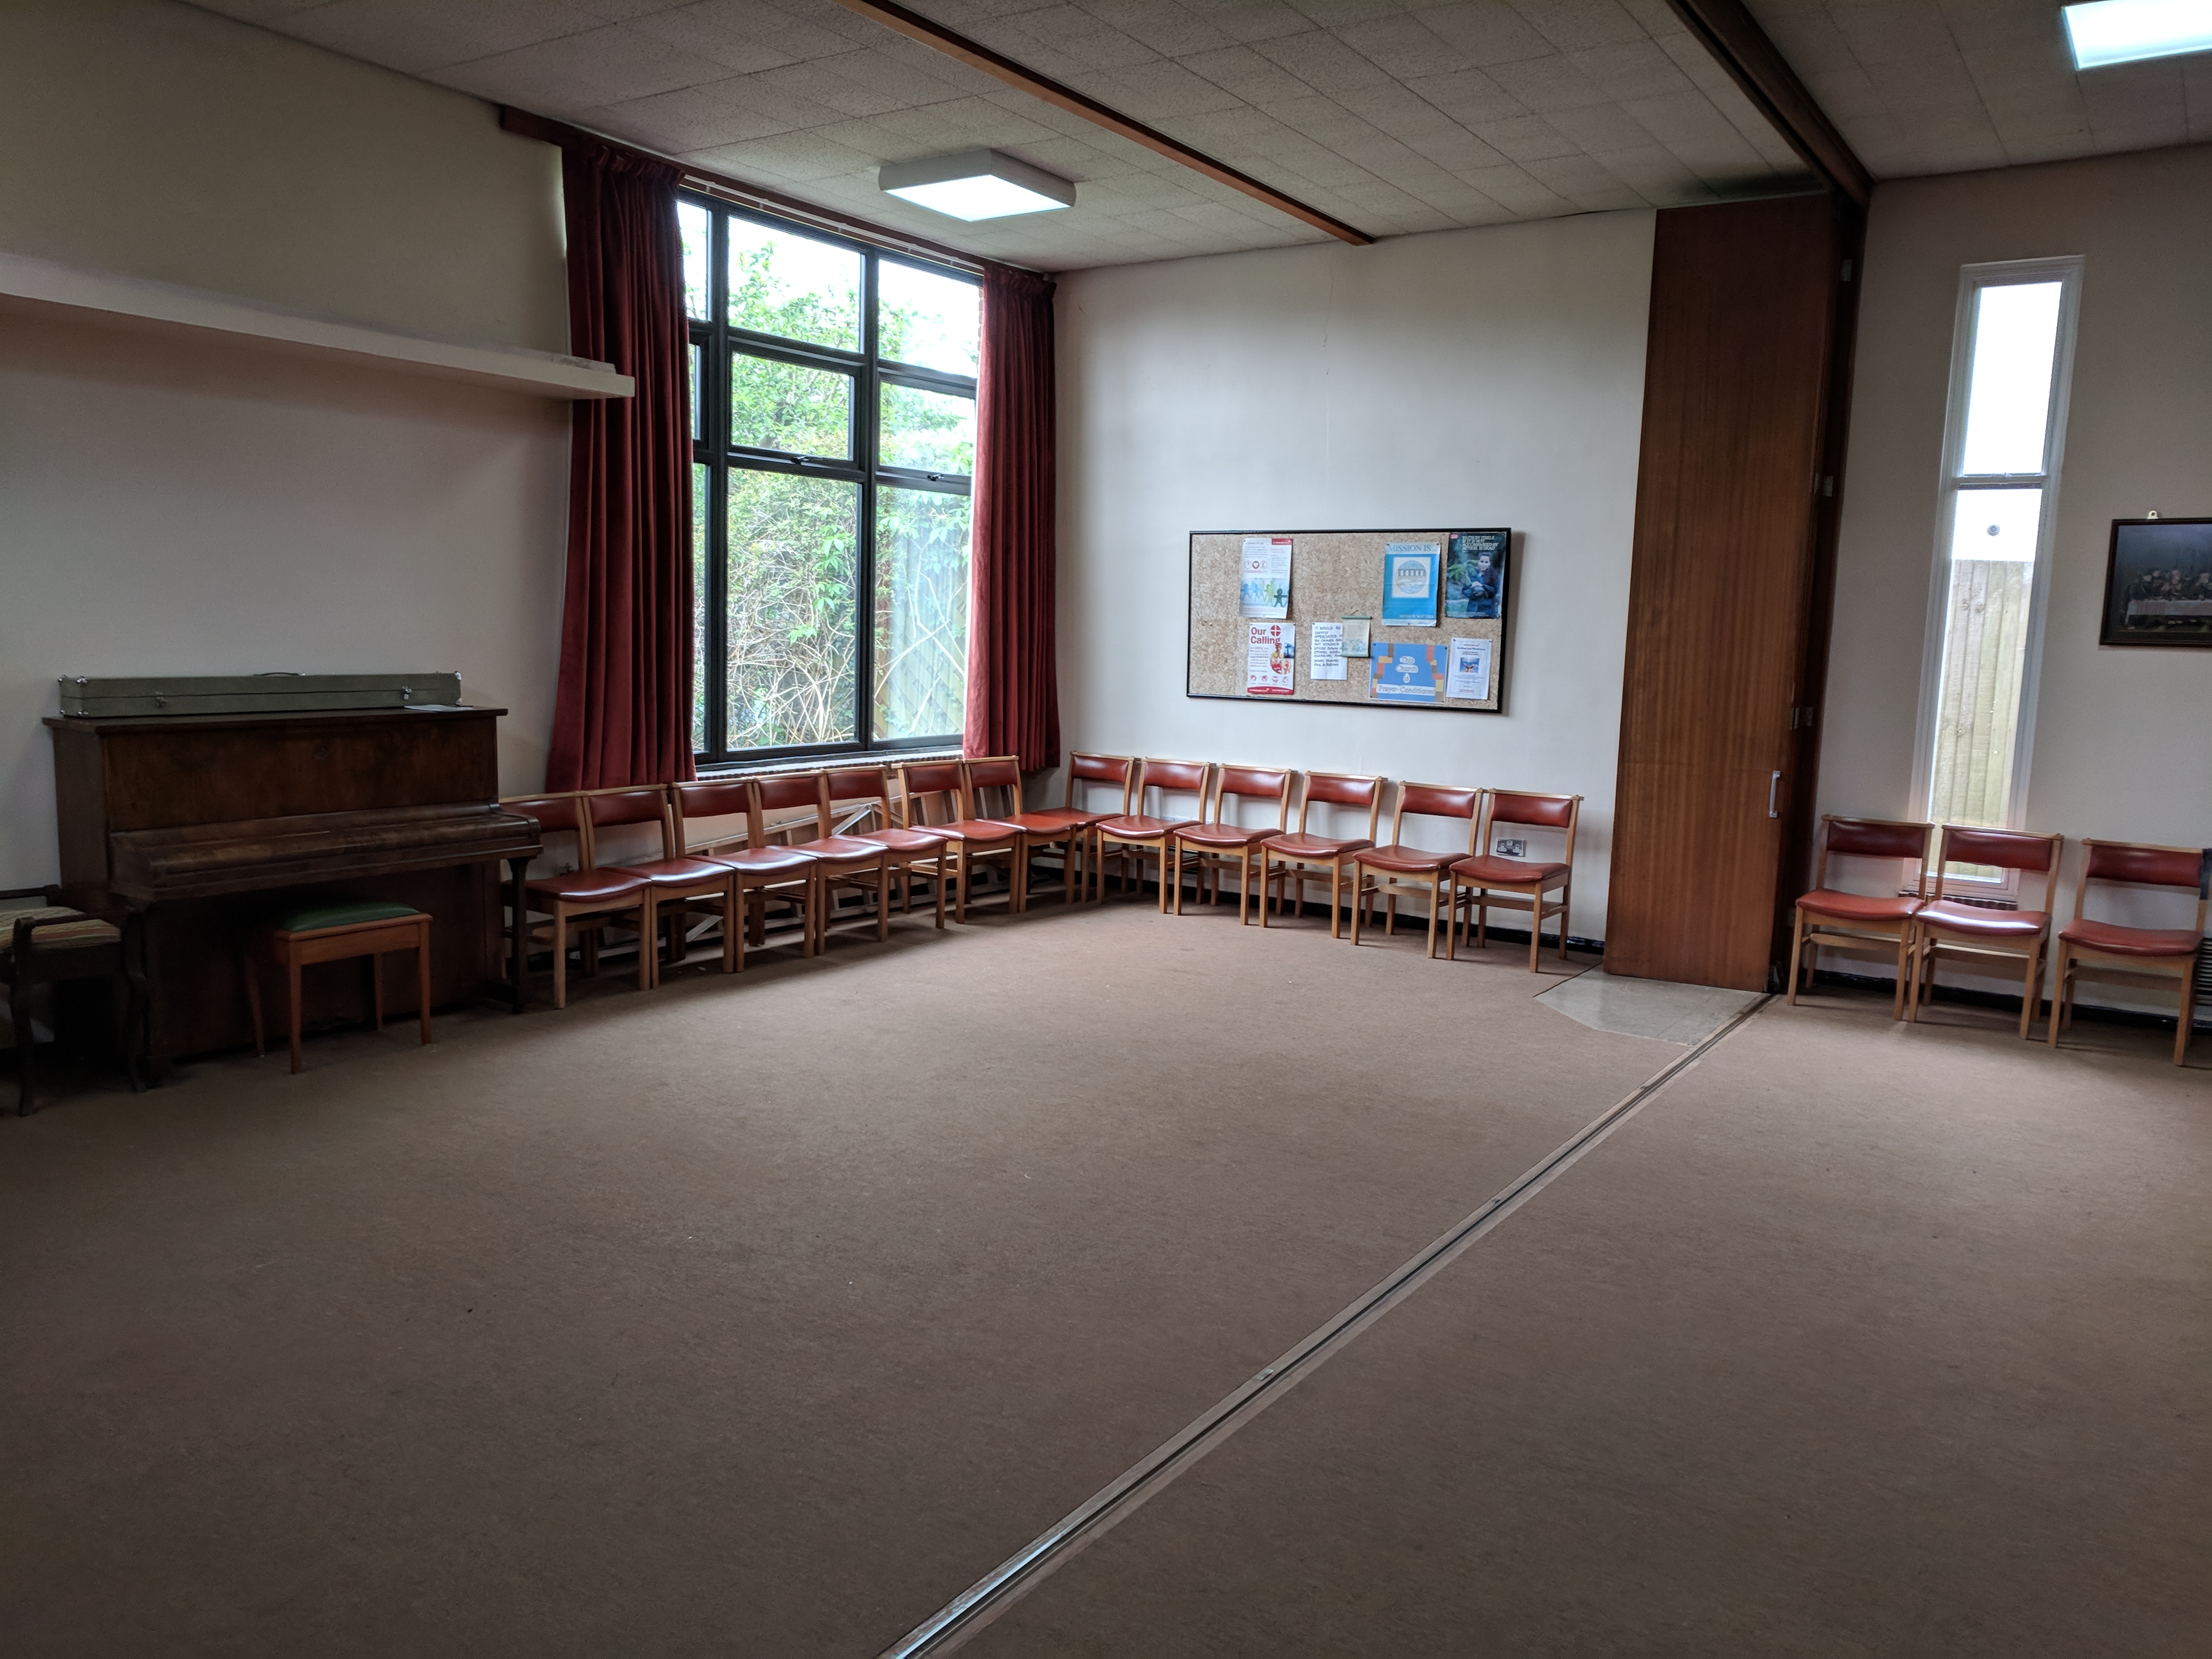 Large and small Hall photos